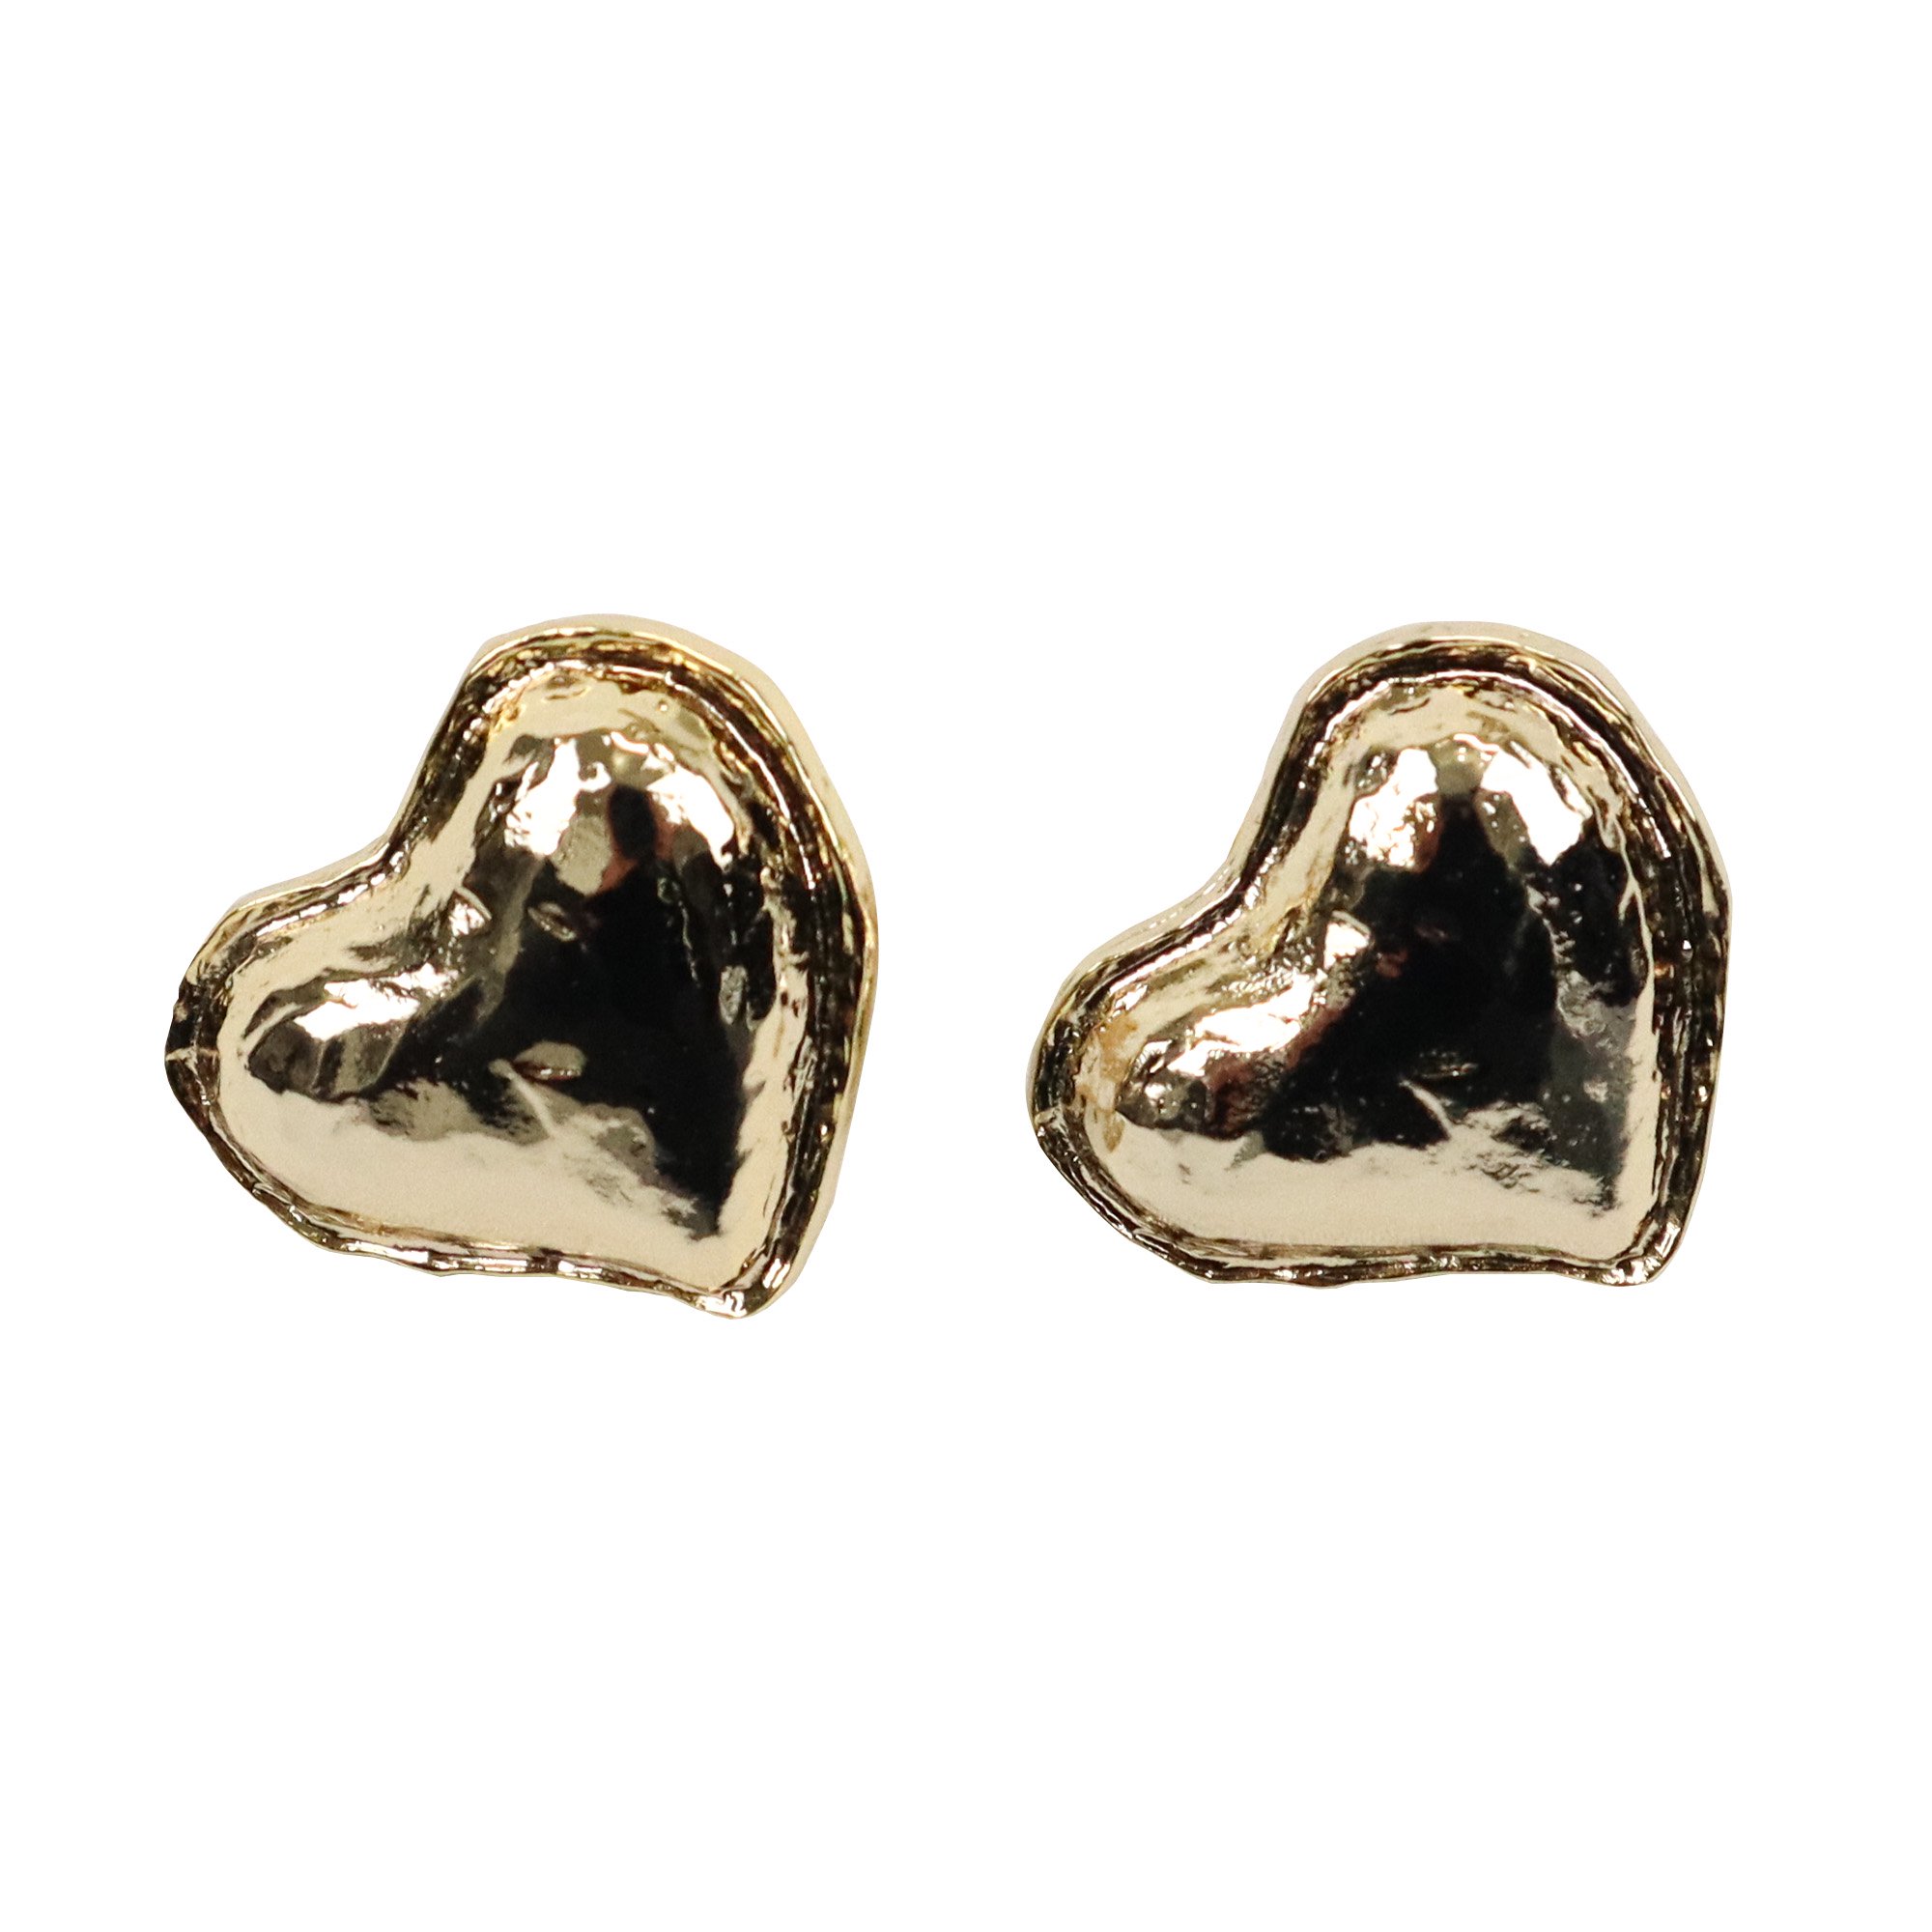 <img class='new_mark_img1' src='https://img.shop-pro.jp/img/new/icons6.gif' style='border:none;display:inline;margin:0px;padding:0px;width:auto;' />SEA'DS MARA Heart motif earring【GOLD】